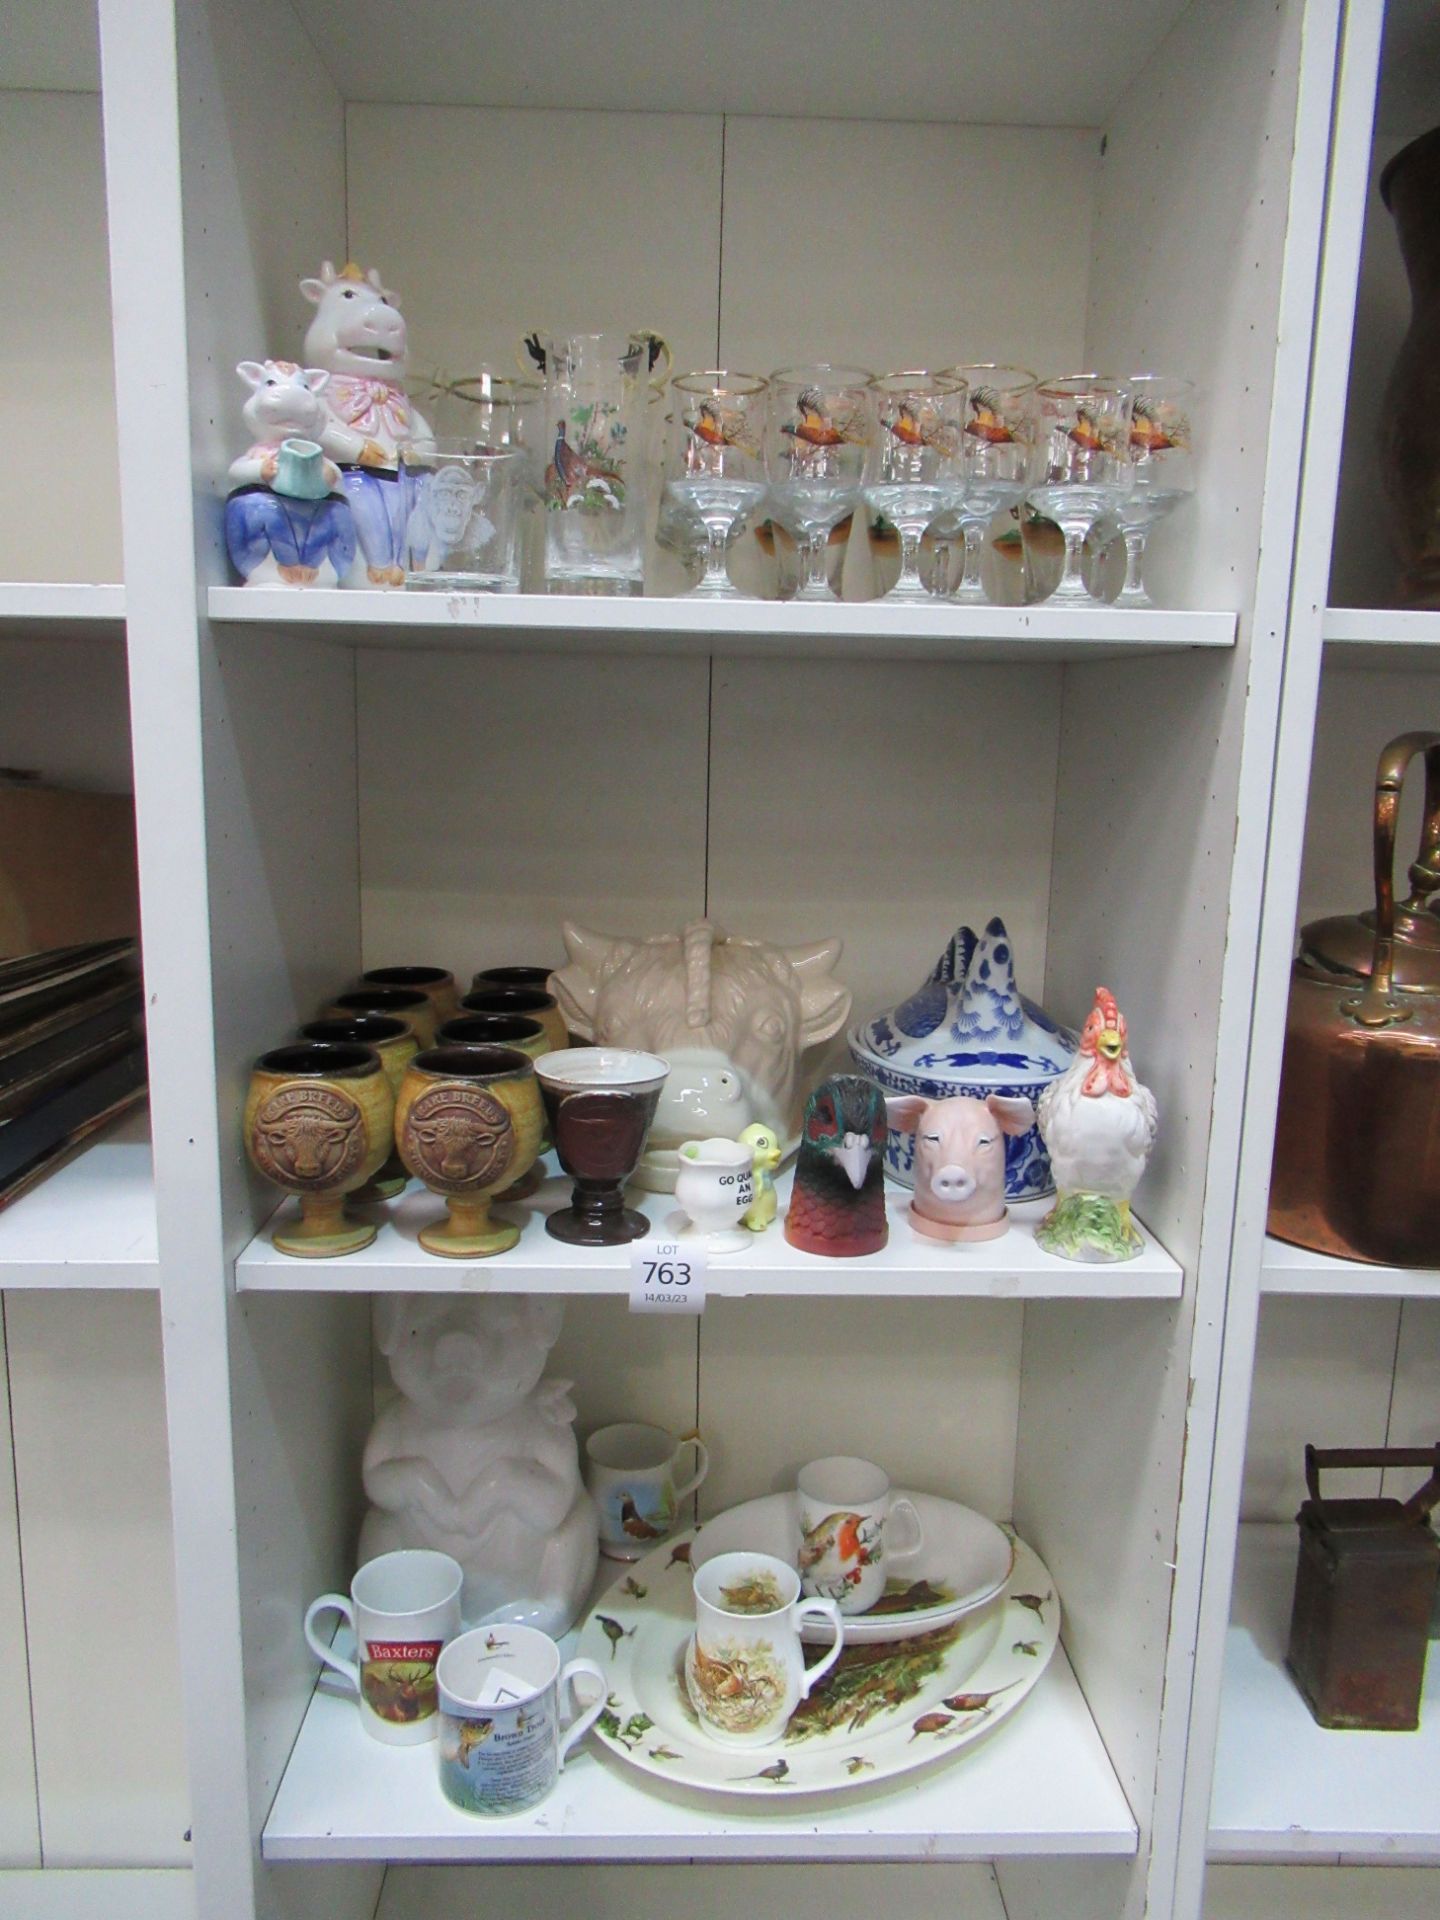 3x shelves of various animal themed pottery and glassware